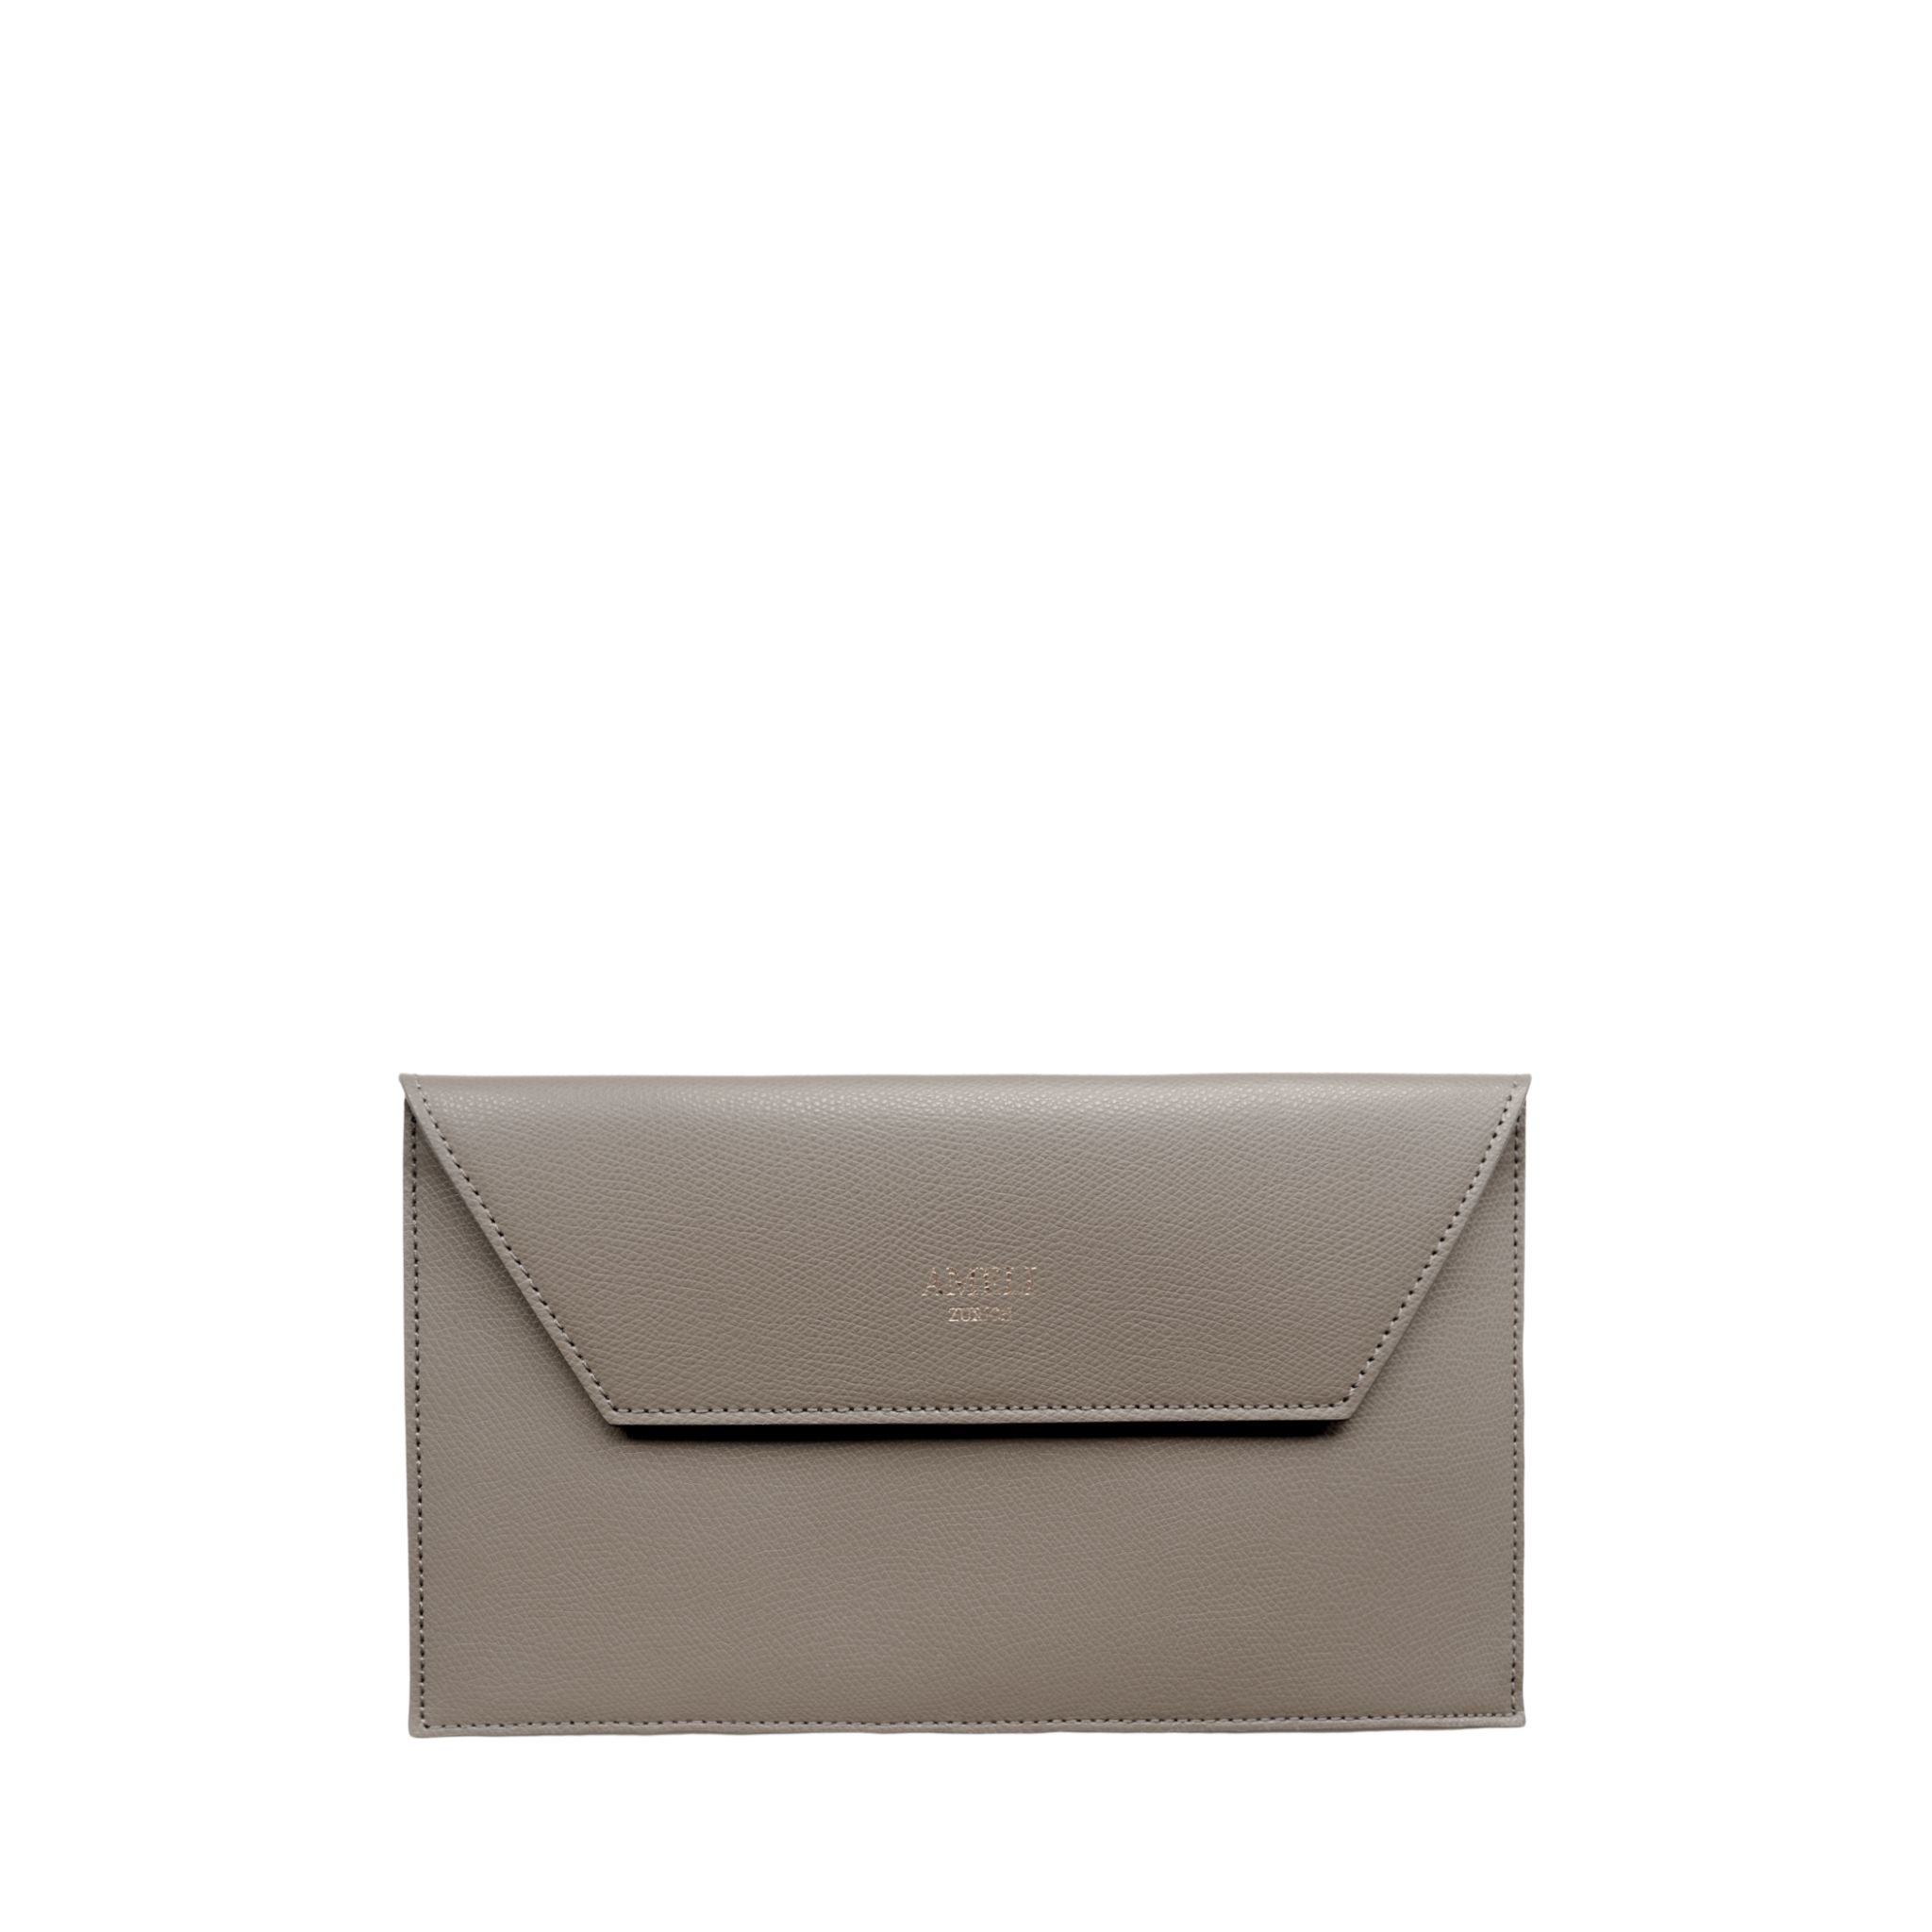 AMELI Zurich  Discover our timeless CARD HOLDER - Maroon Red